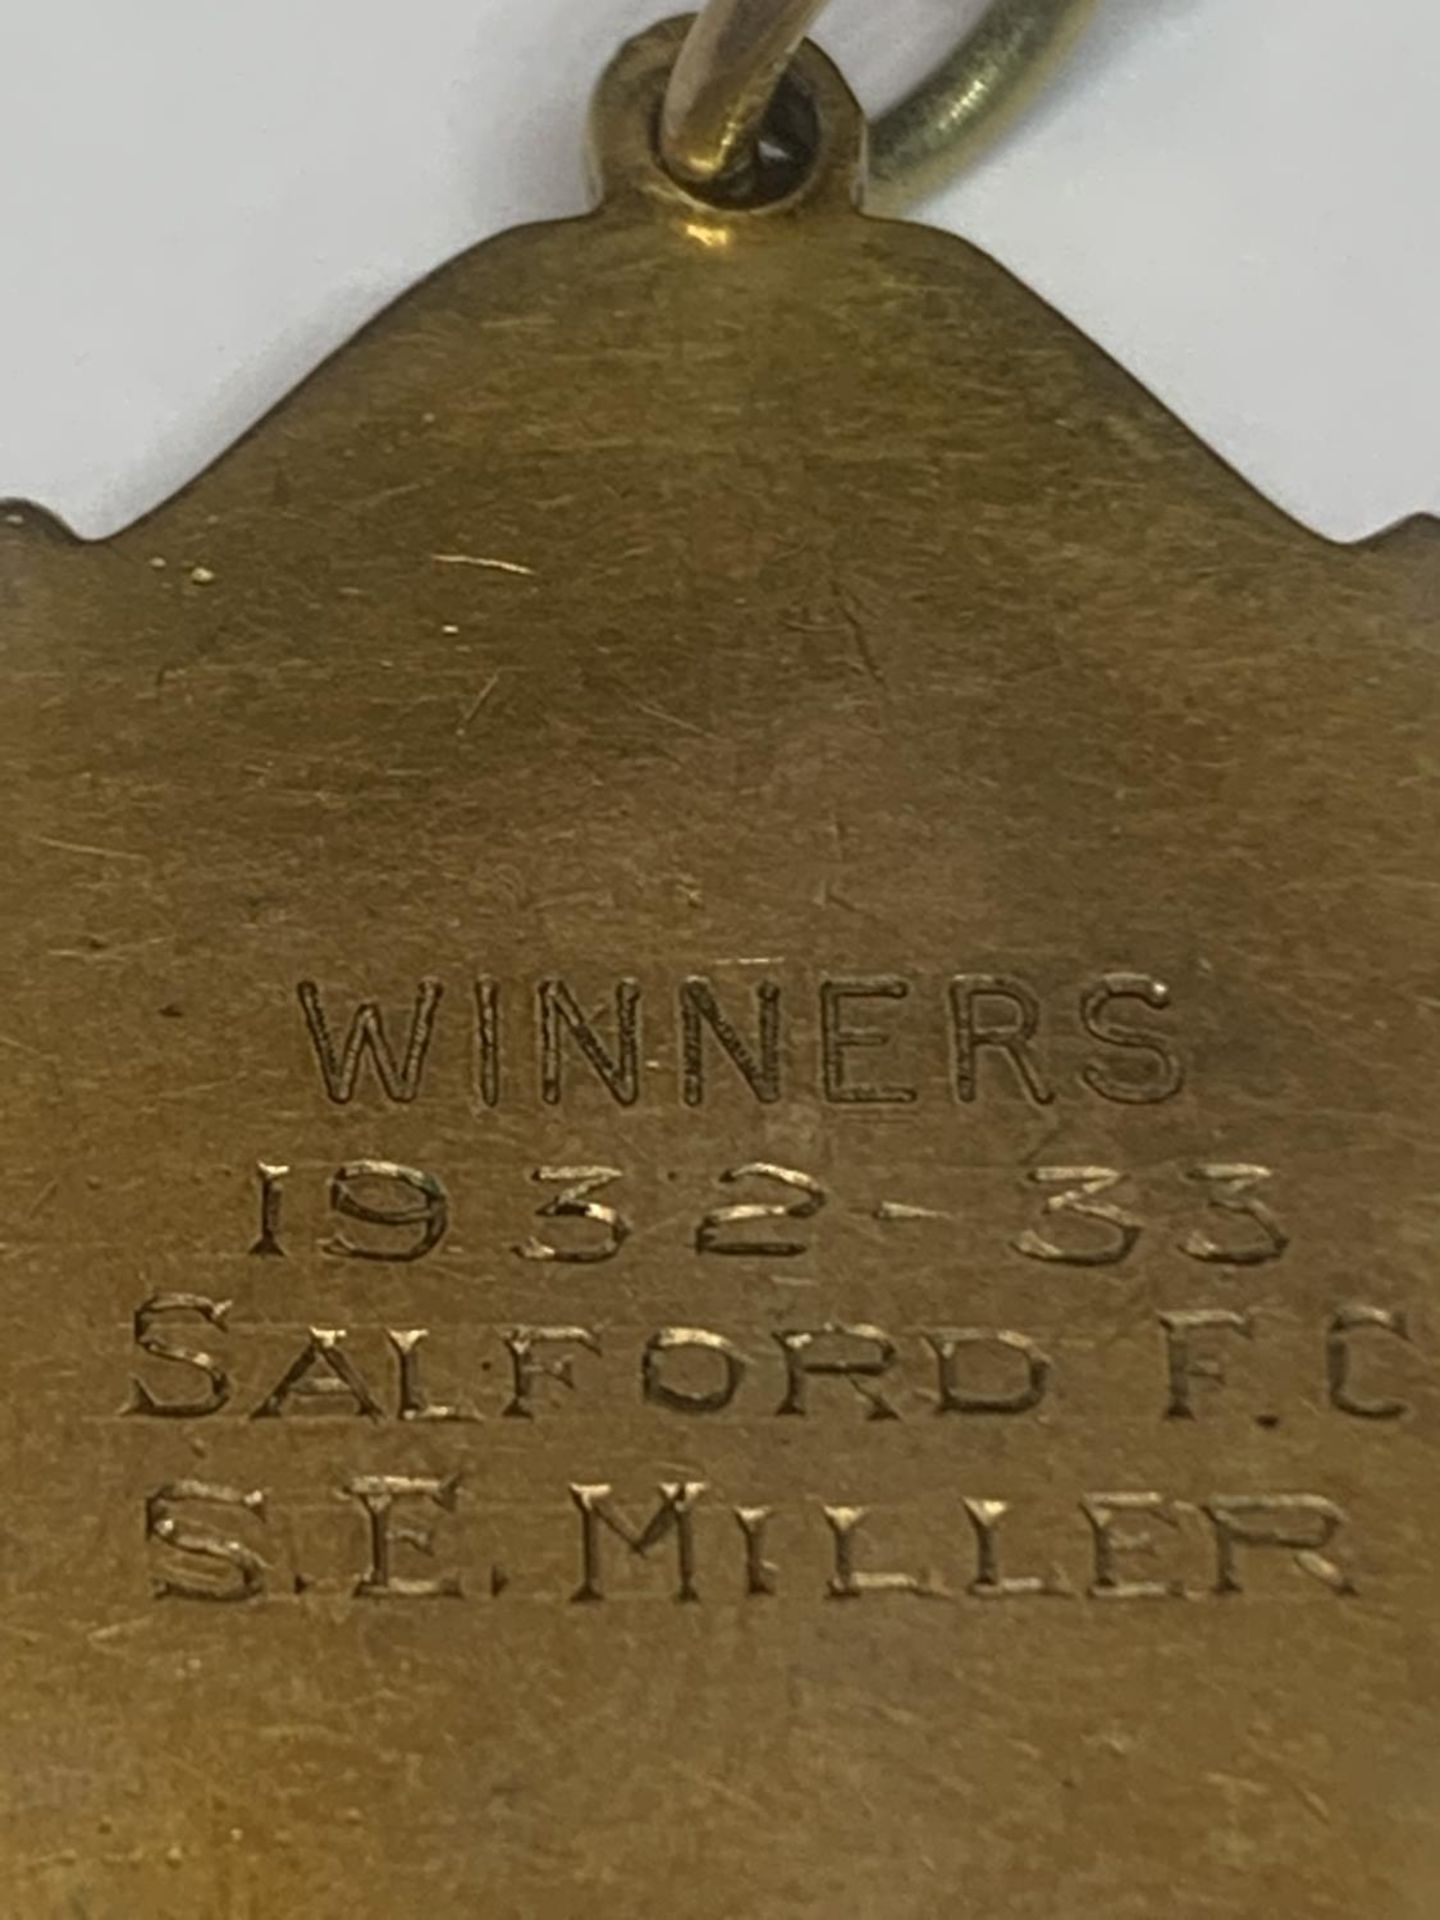 A HALLMARKED 9 CARAT GOLD LANCASHIRE RUGBY LEAGUE MEDAL ENGRAVED WINNERS 1932-33 SALFORD F.C., S.E. - Image 3 of 5